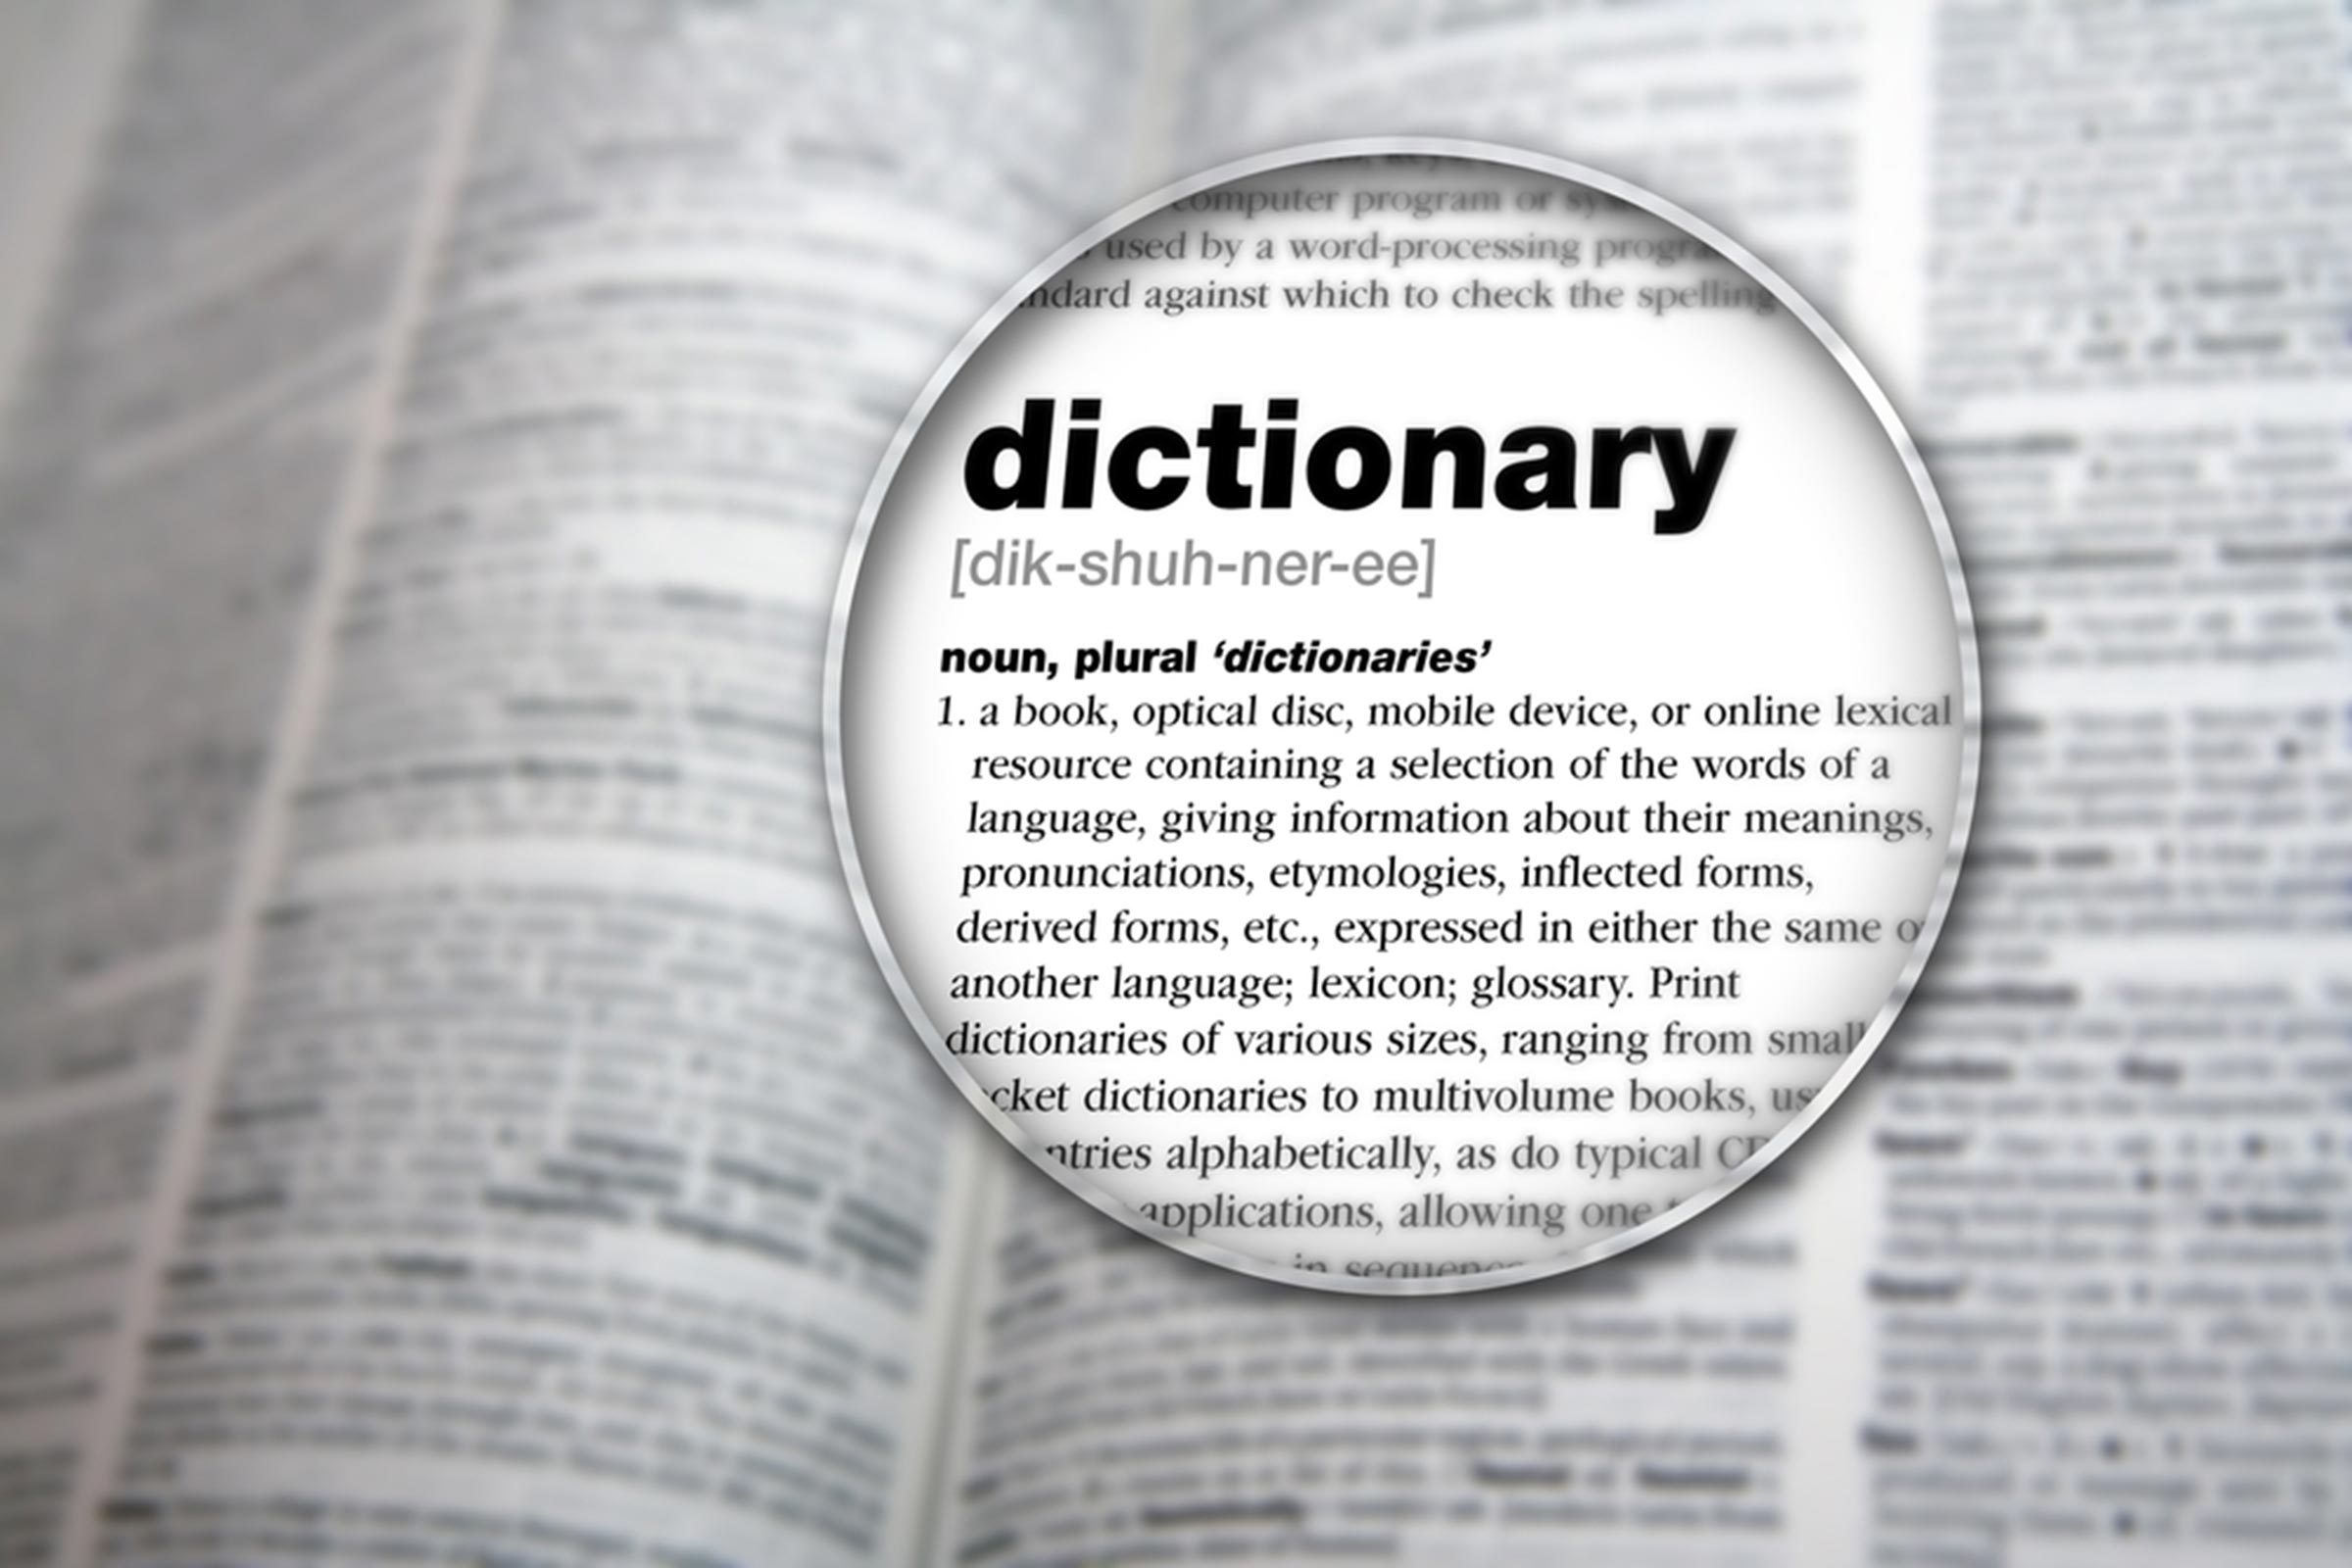 This Is How Dictionary Editors Prank Each Other | Reader's Digest vocabulary word search maker